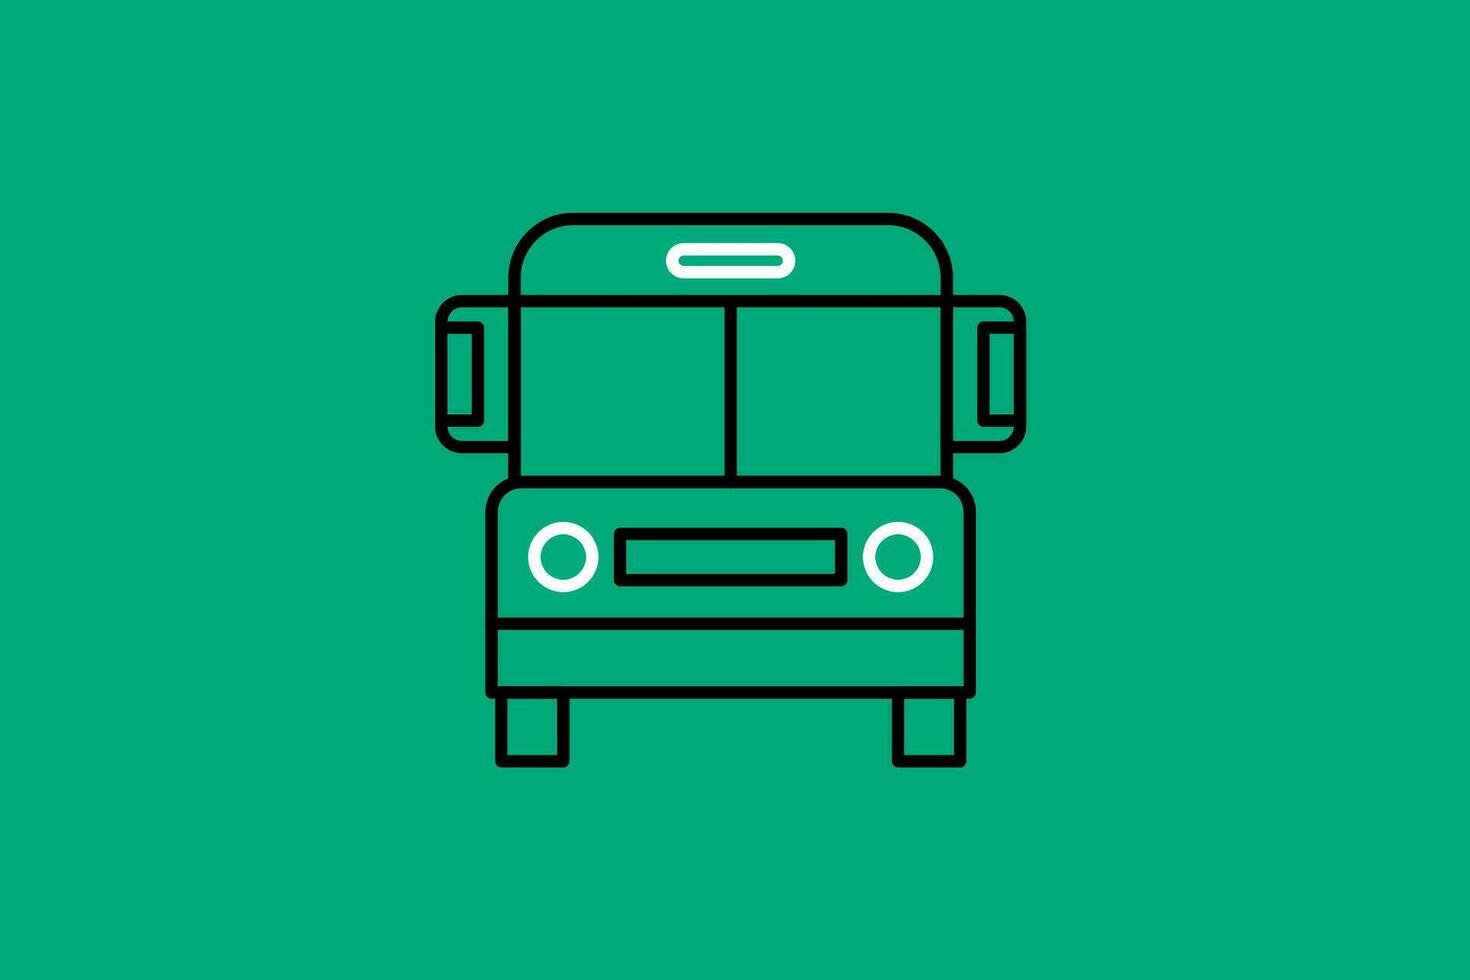 Bus concept icon on green background. Flat art style illustration vector